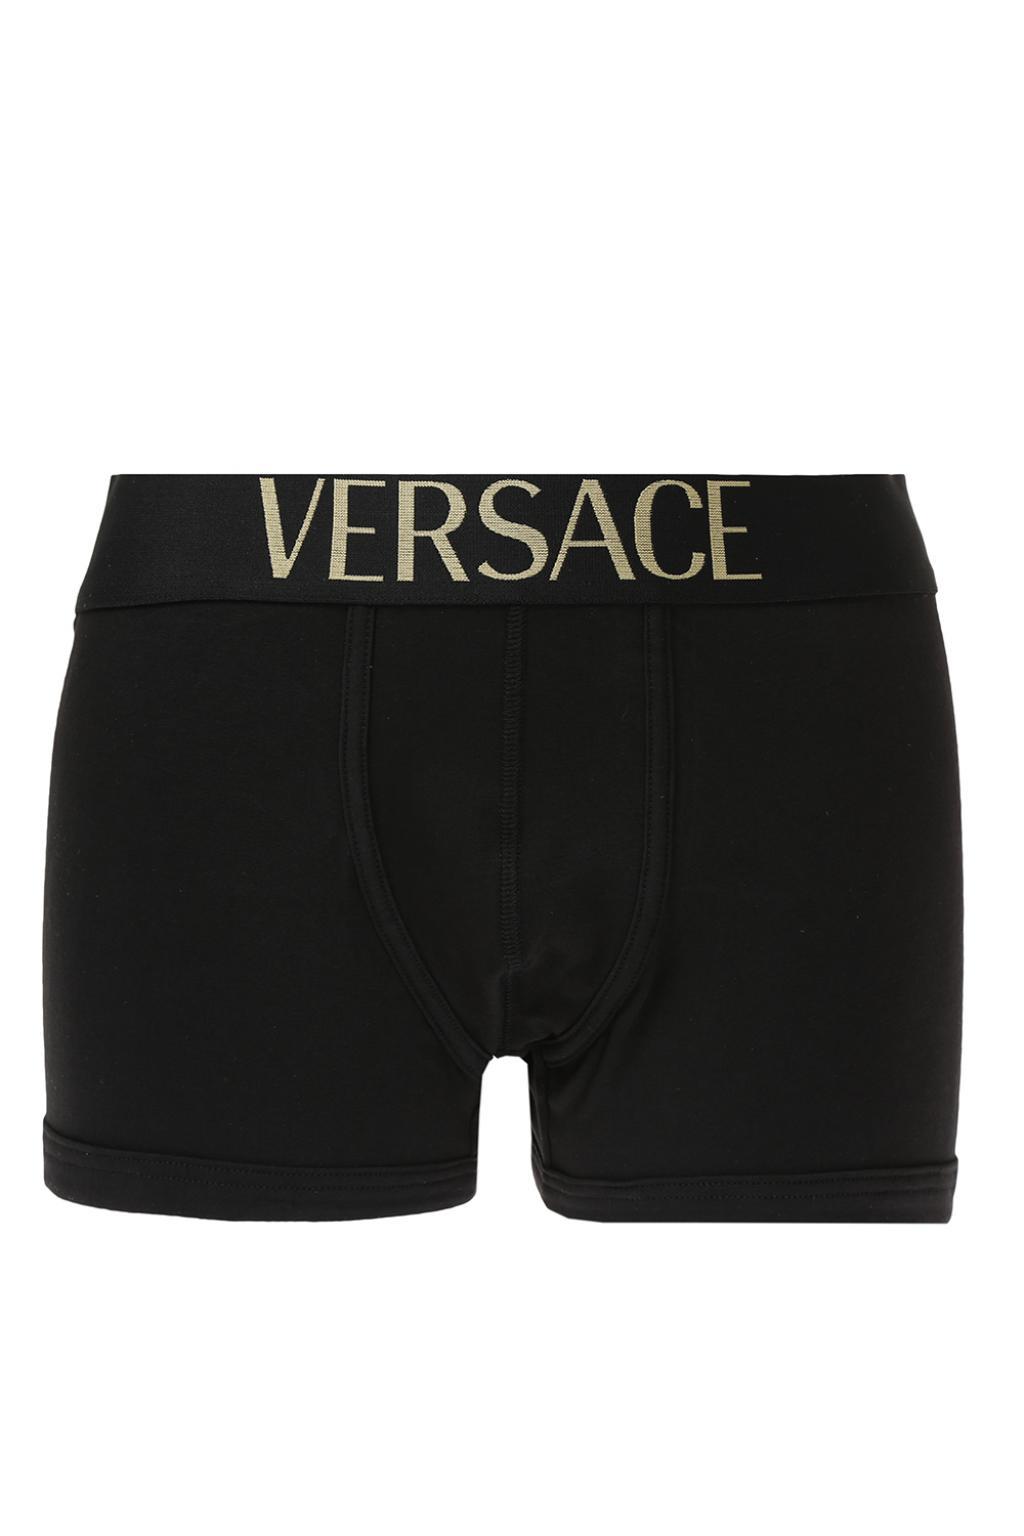 Versace Cotton Boxers Three-pack Multicolour in Black for Men - Lyst